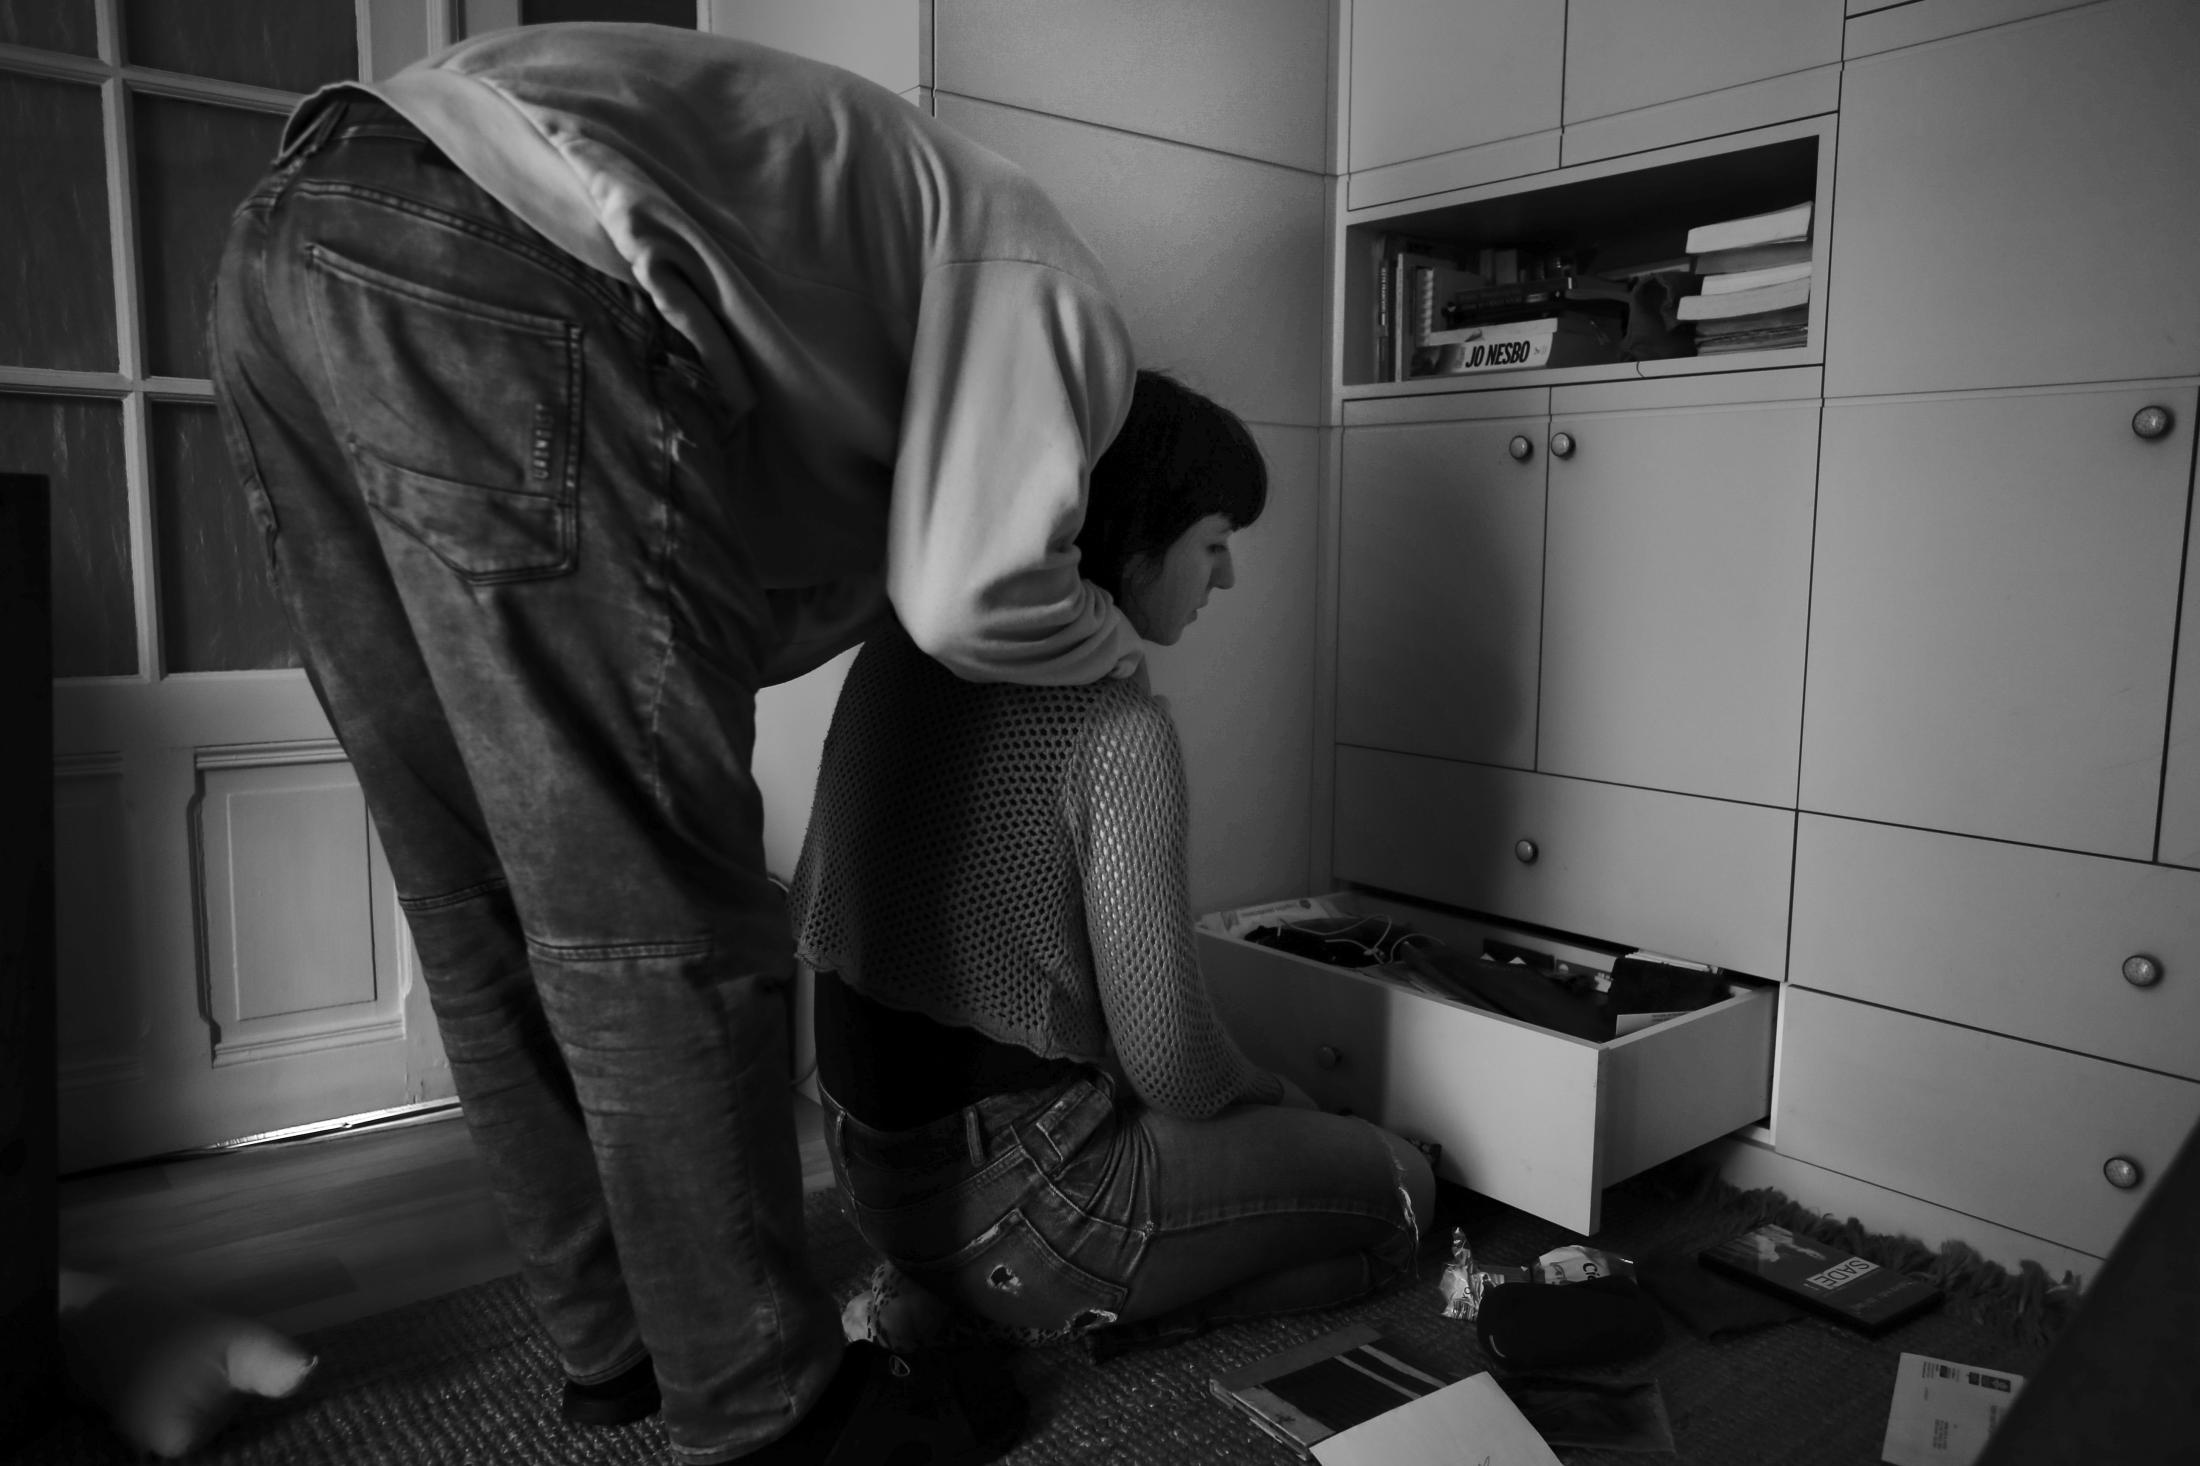 Mateusz makes a gesture of tenderness towards Ewa during their logistical installation in her mother&#39;s apartment.